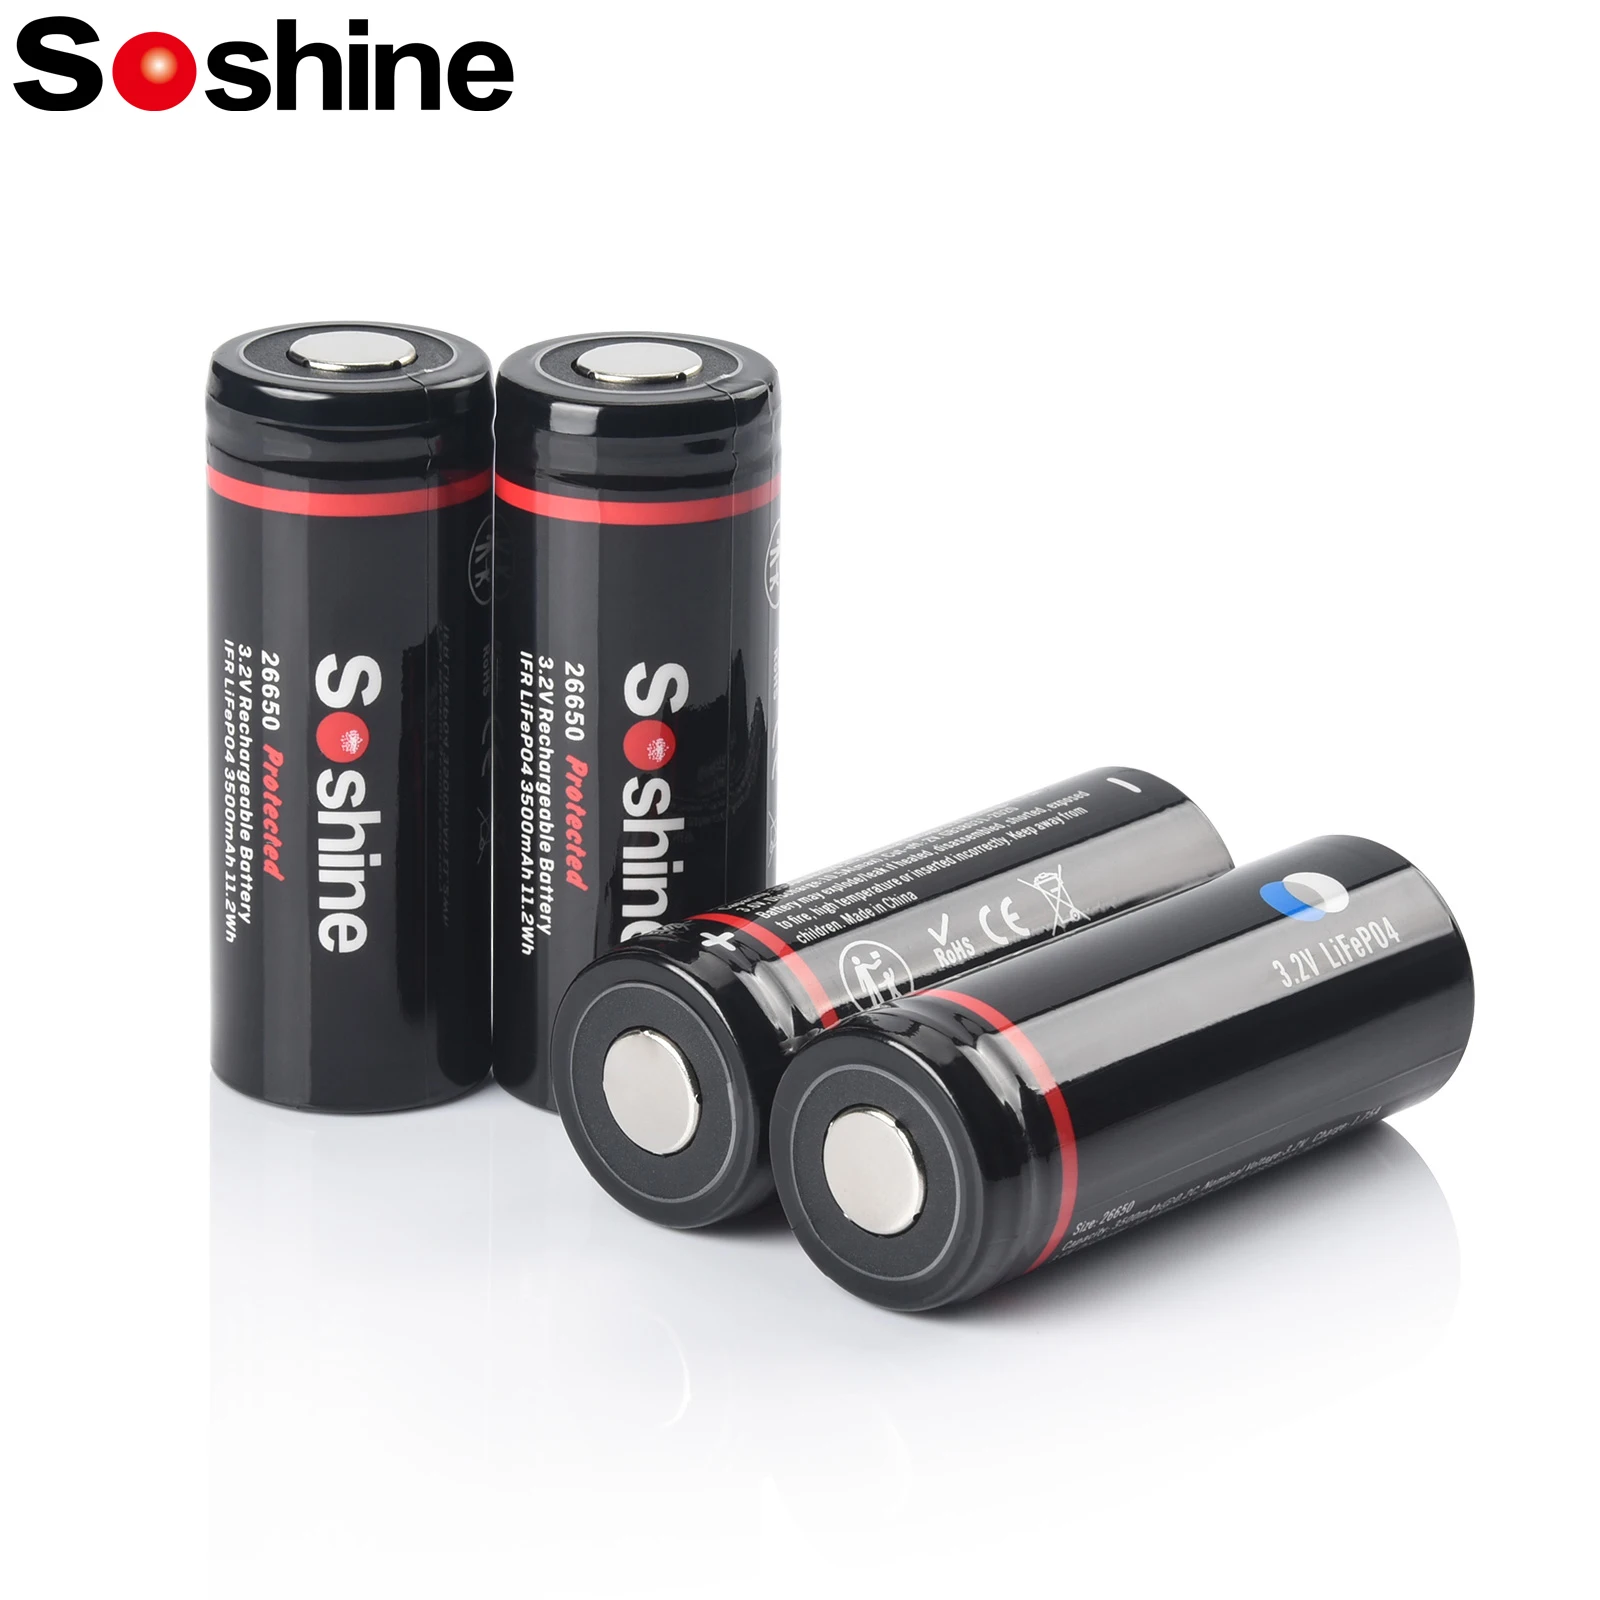 

Soshine 26650 LiFePO4 Battery with Protected 3.2V 3500mAh LiFePO4 Rechargeable Batteries High Quality 3500mAh 26650 Batteryies